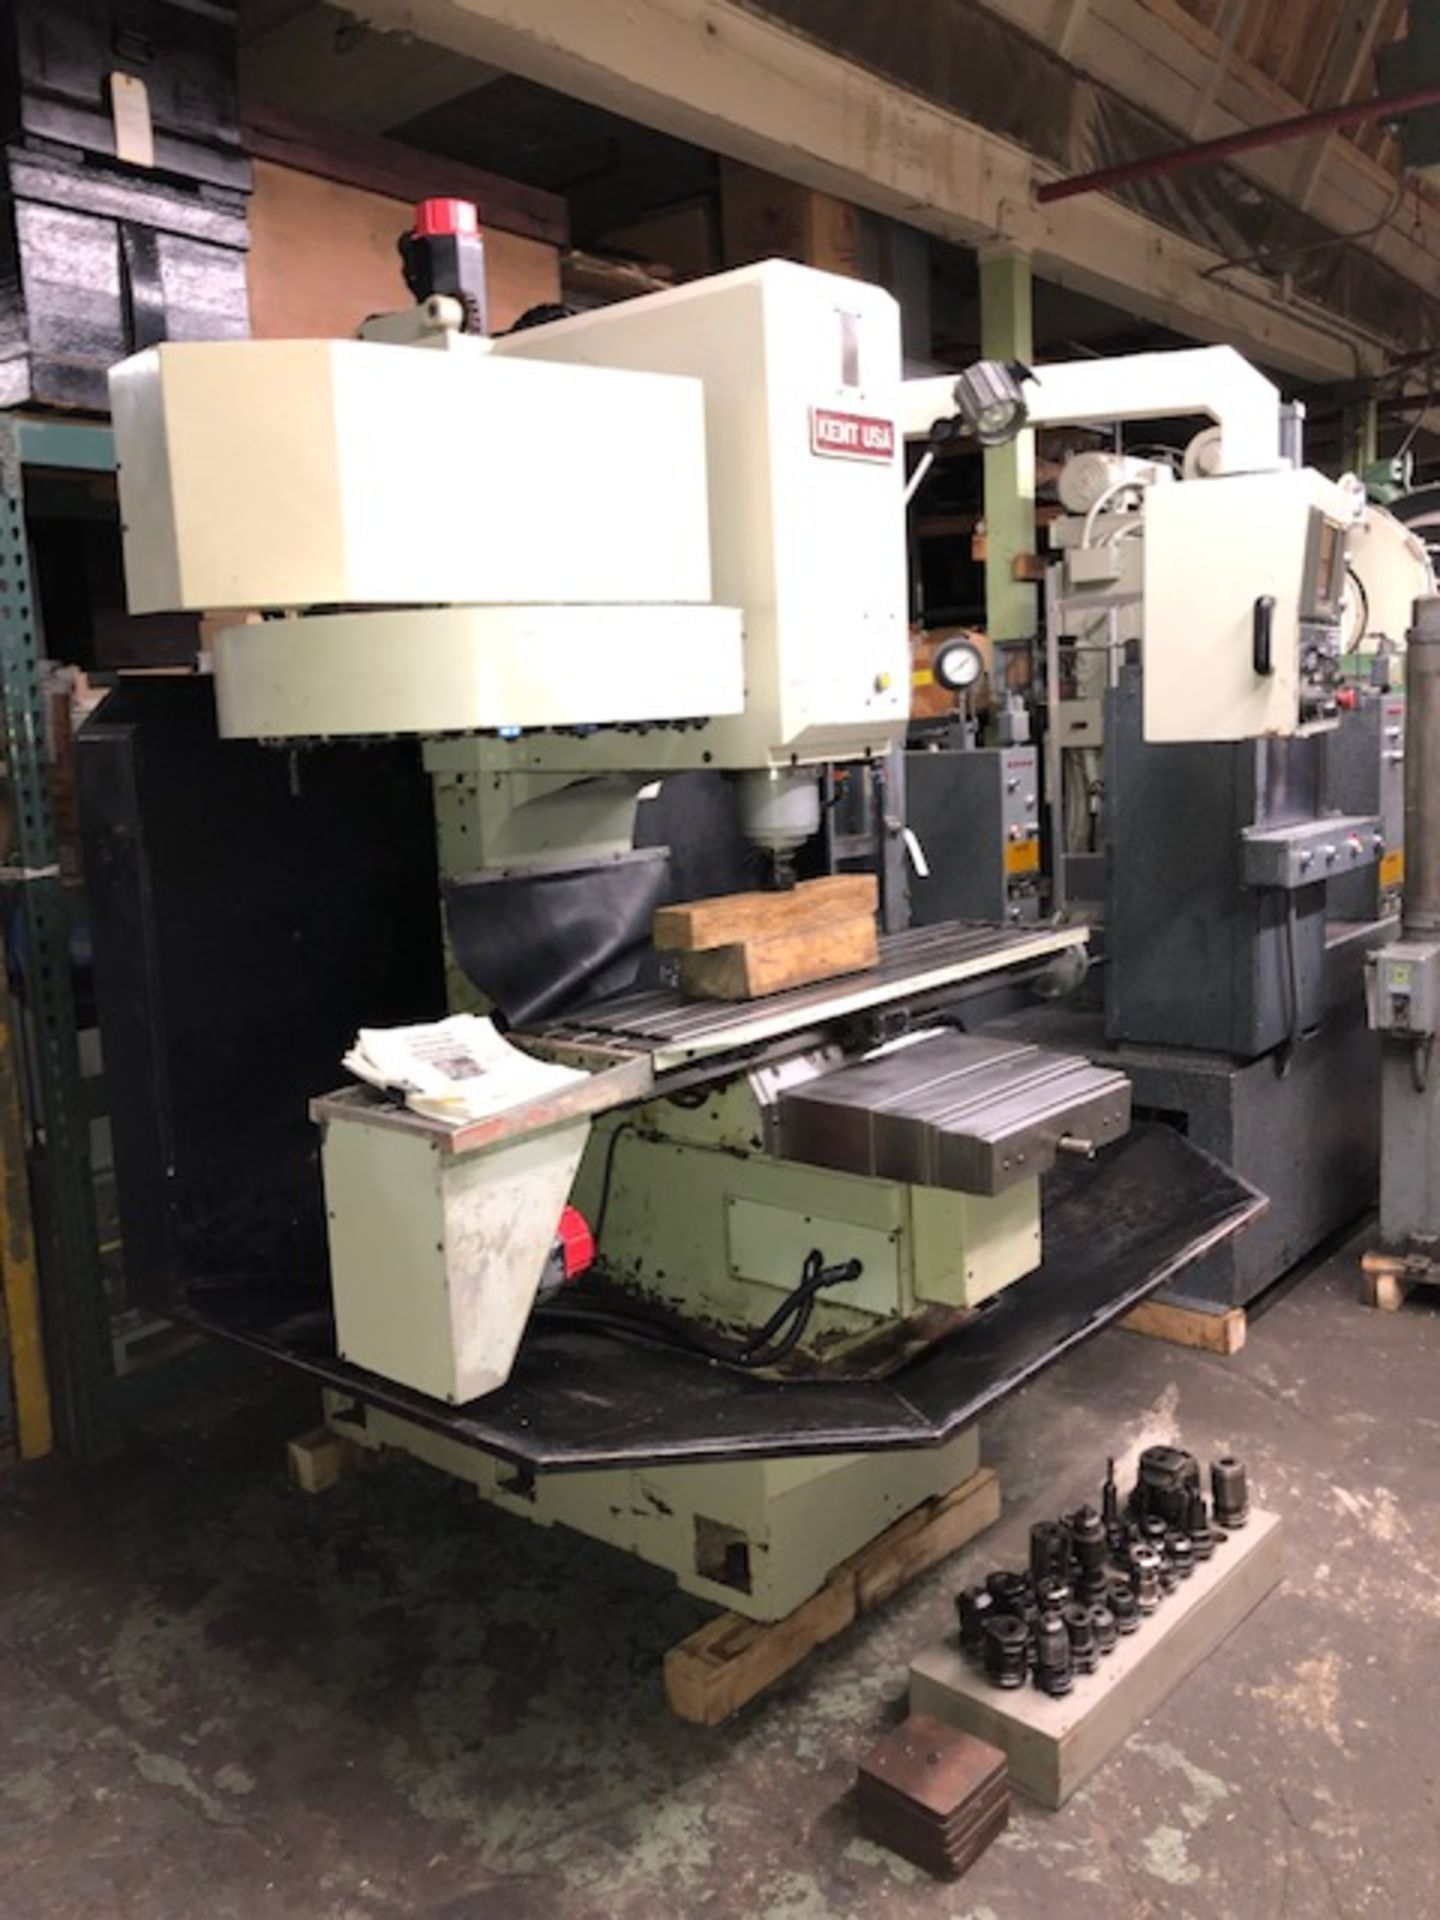 KENT USA MDL. TW-32-MV CNC BED MILL, FANUC 3-AXIS O-MD CONTROL - Image 4 of 30